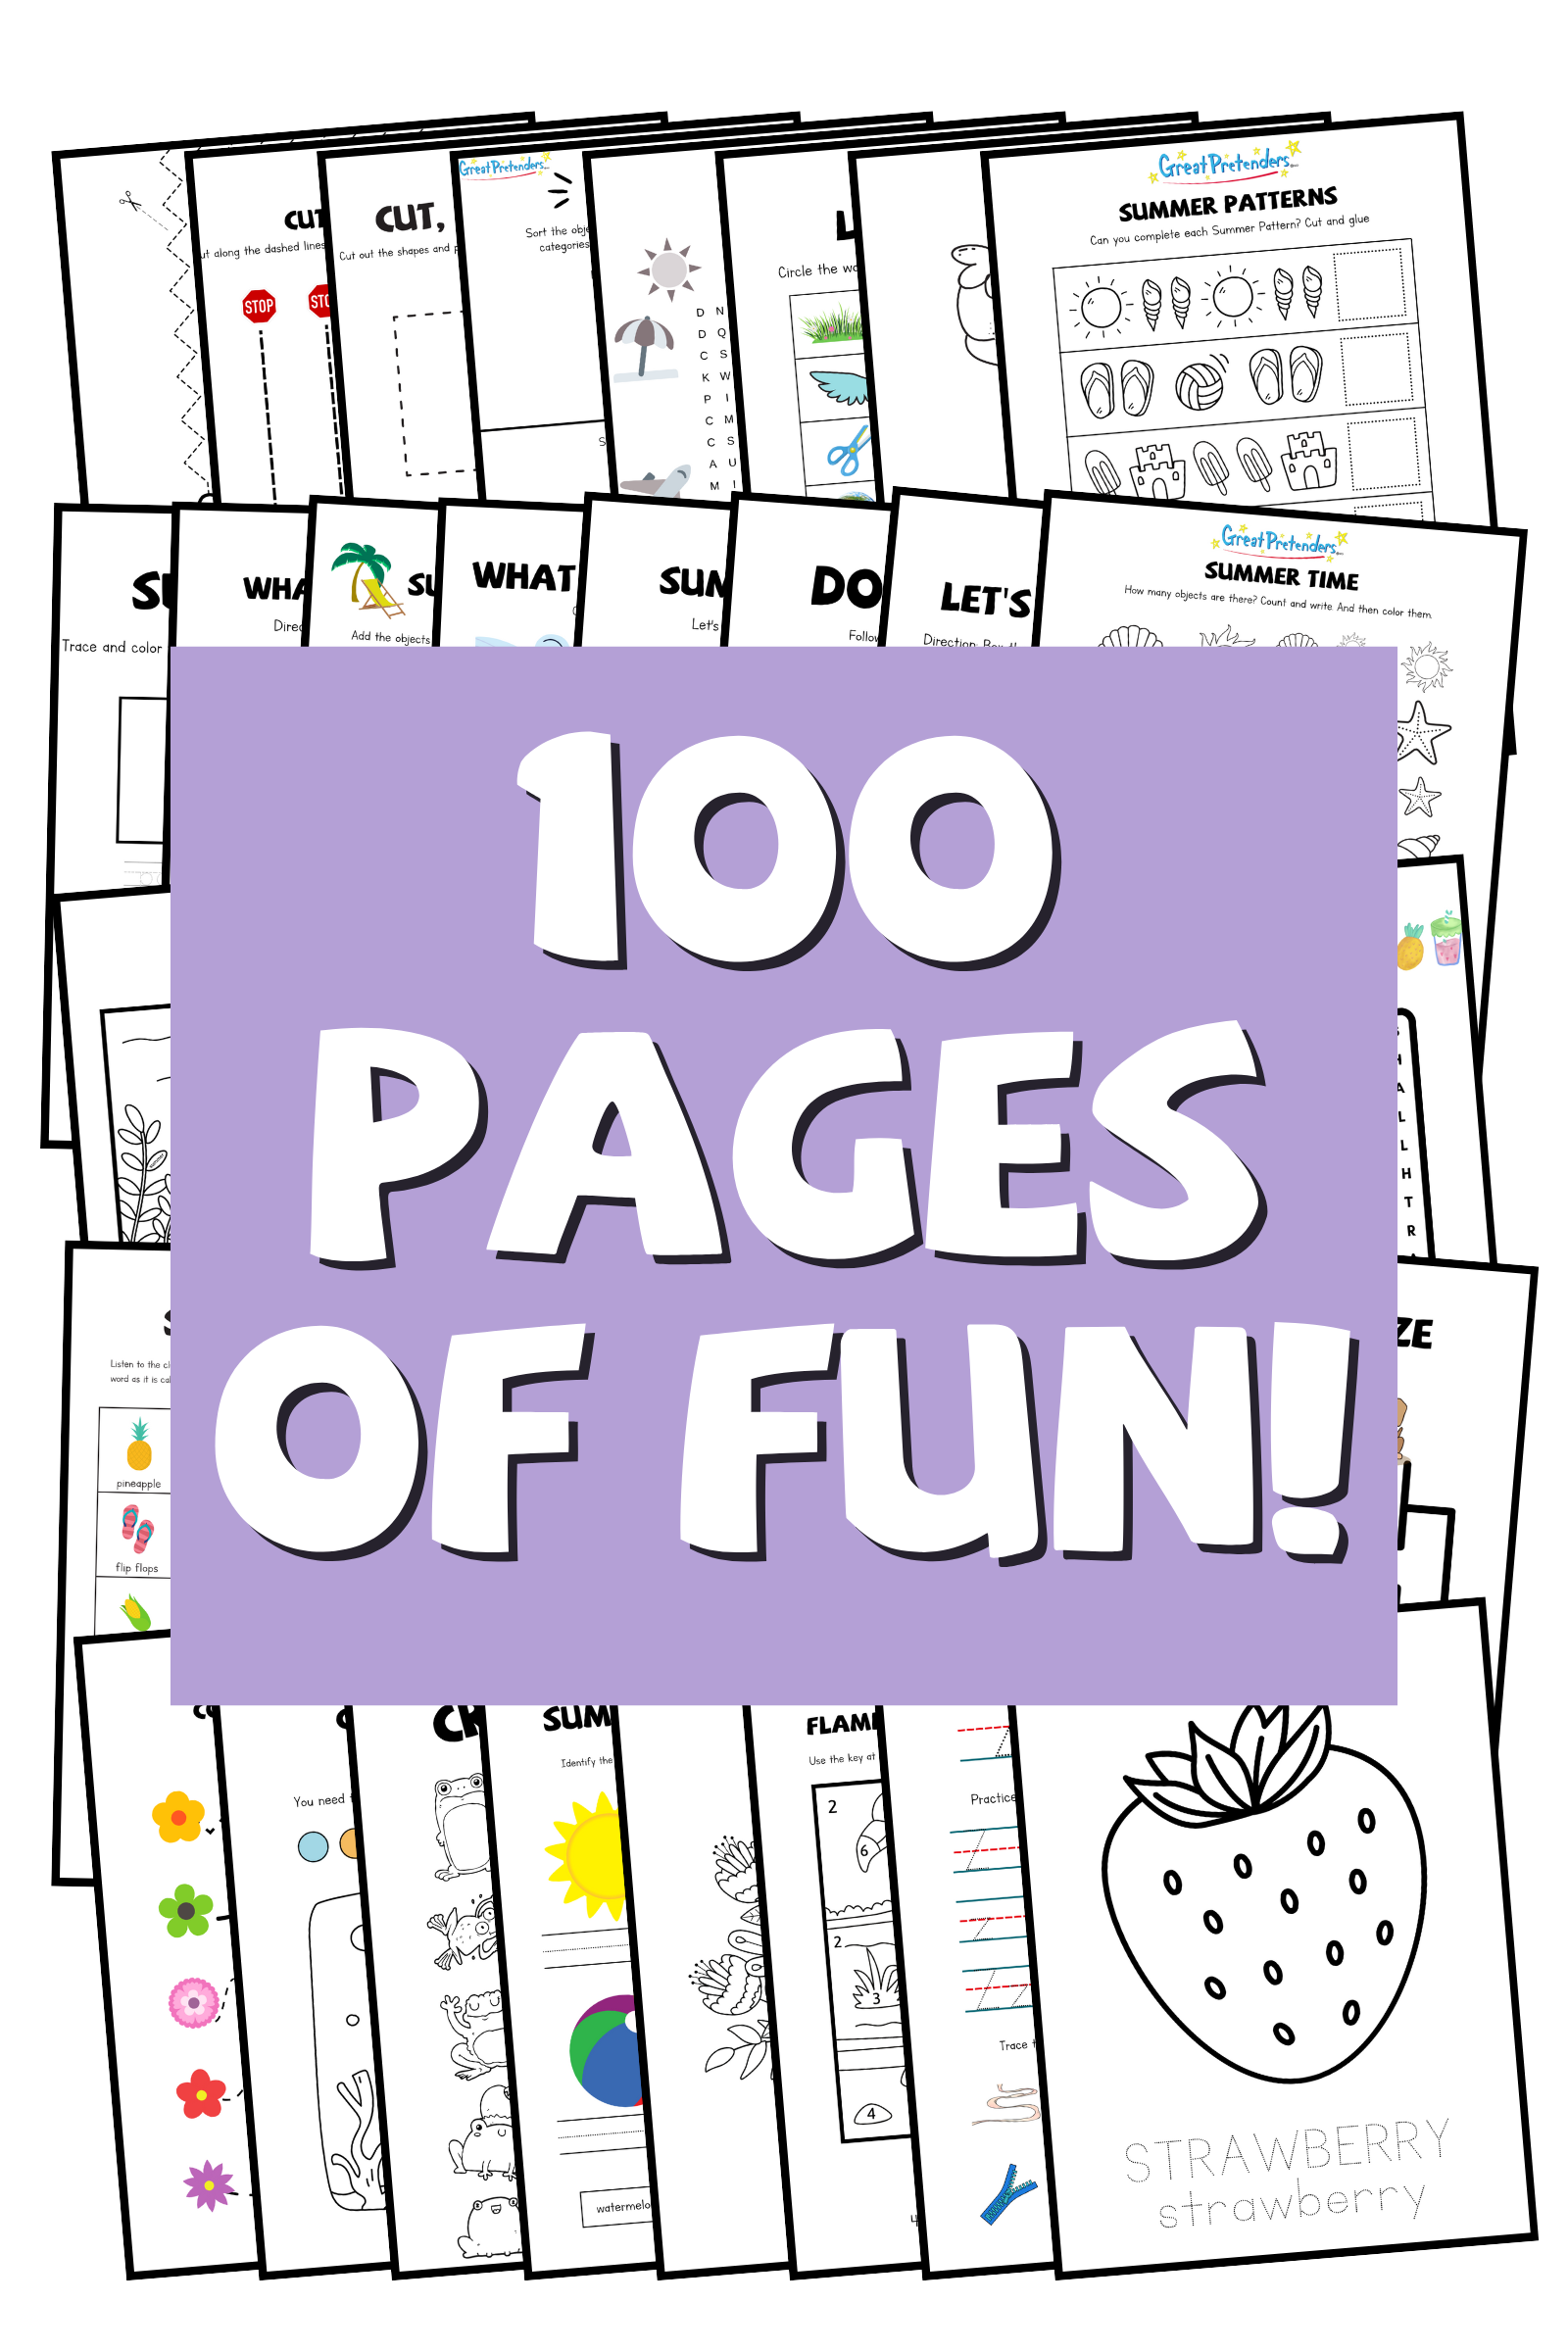 Summer Learning Materials - 100 pages!